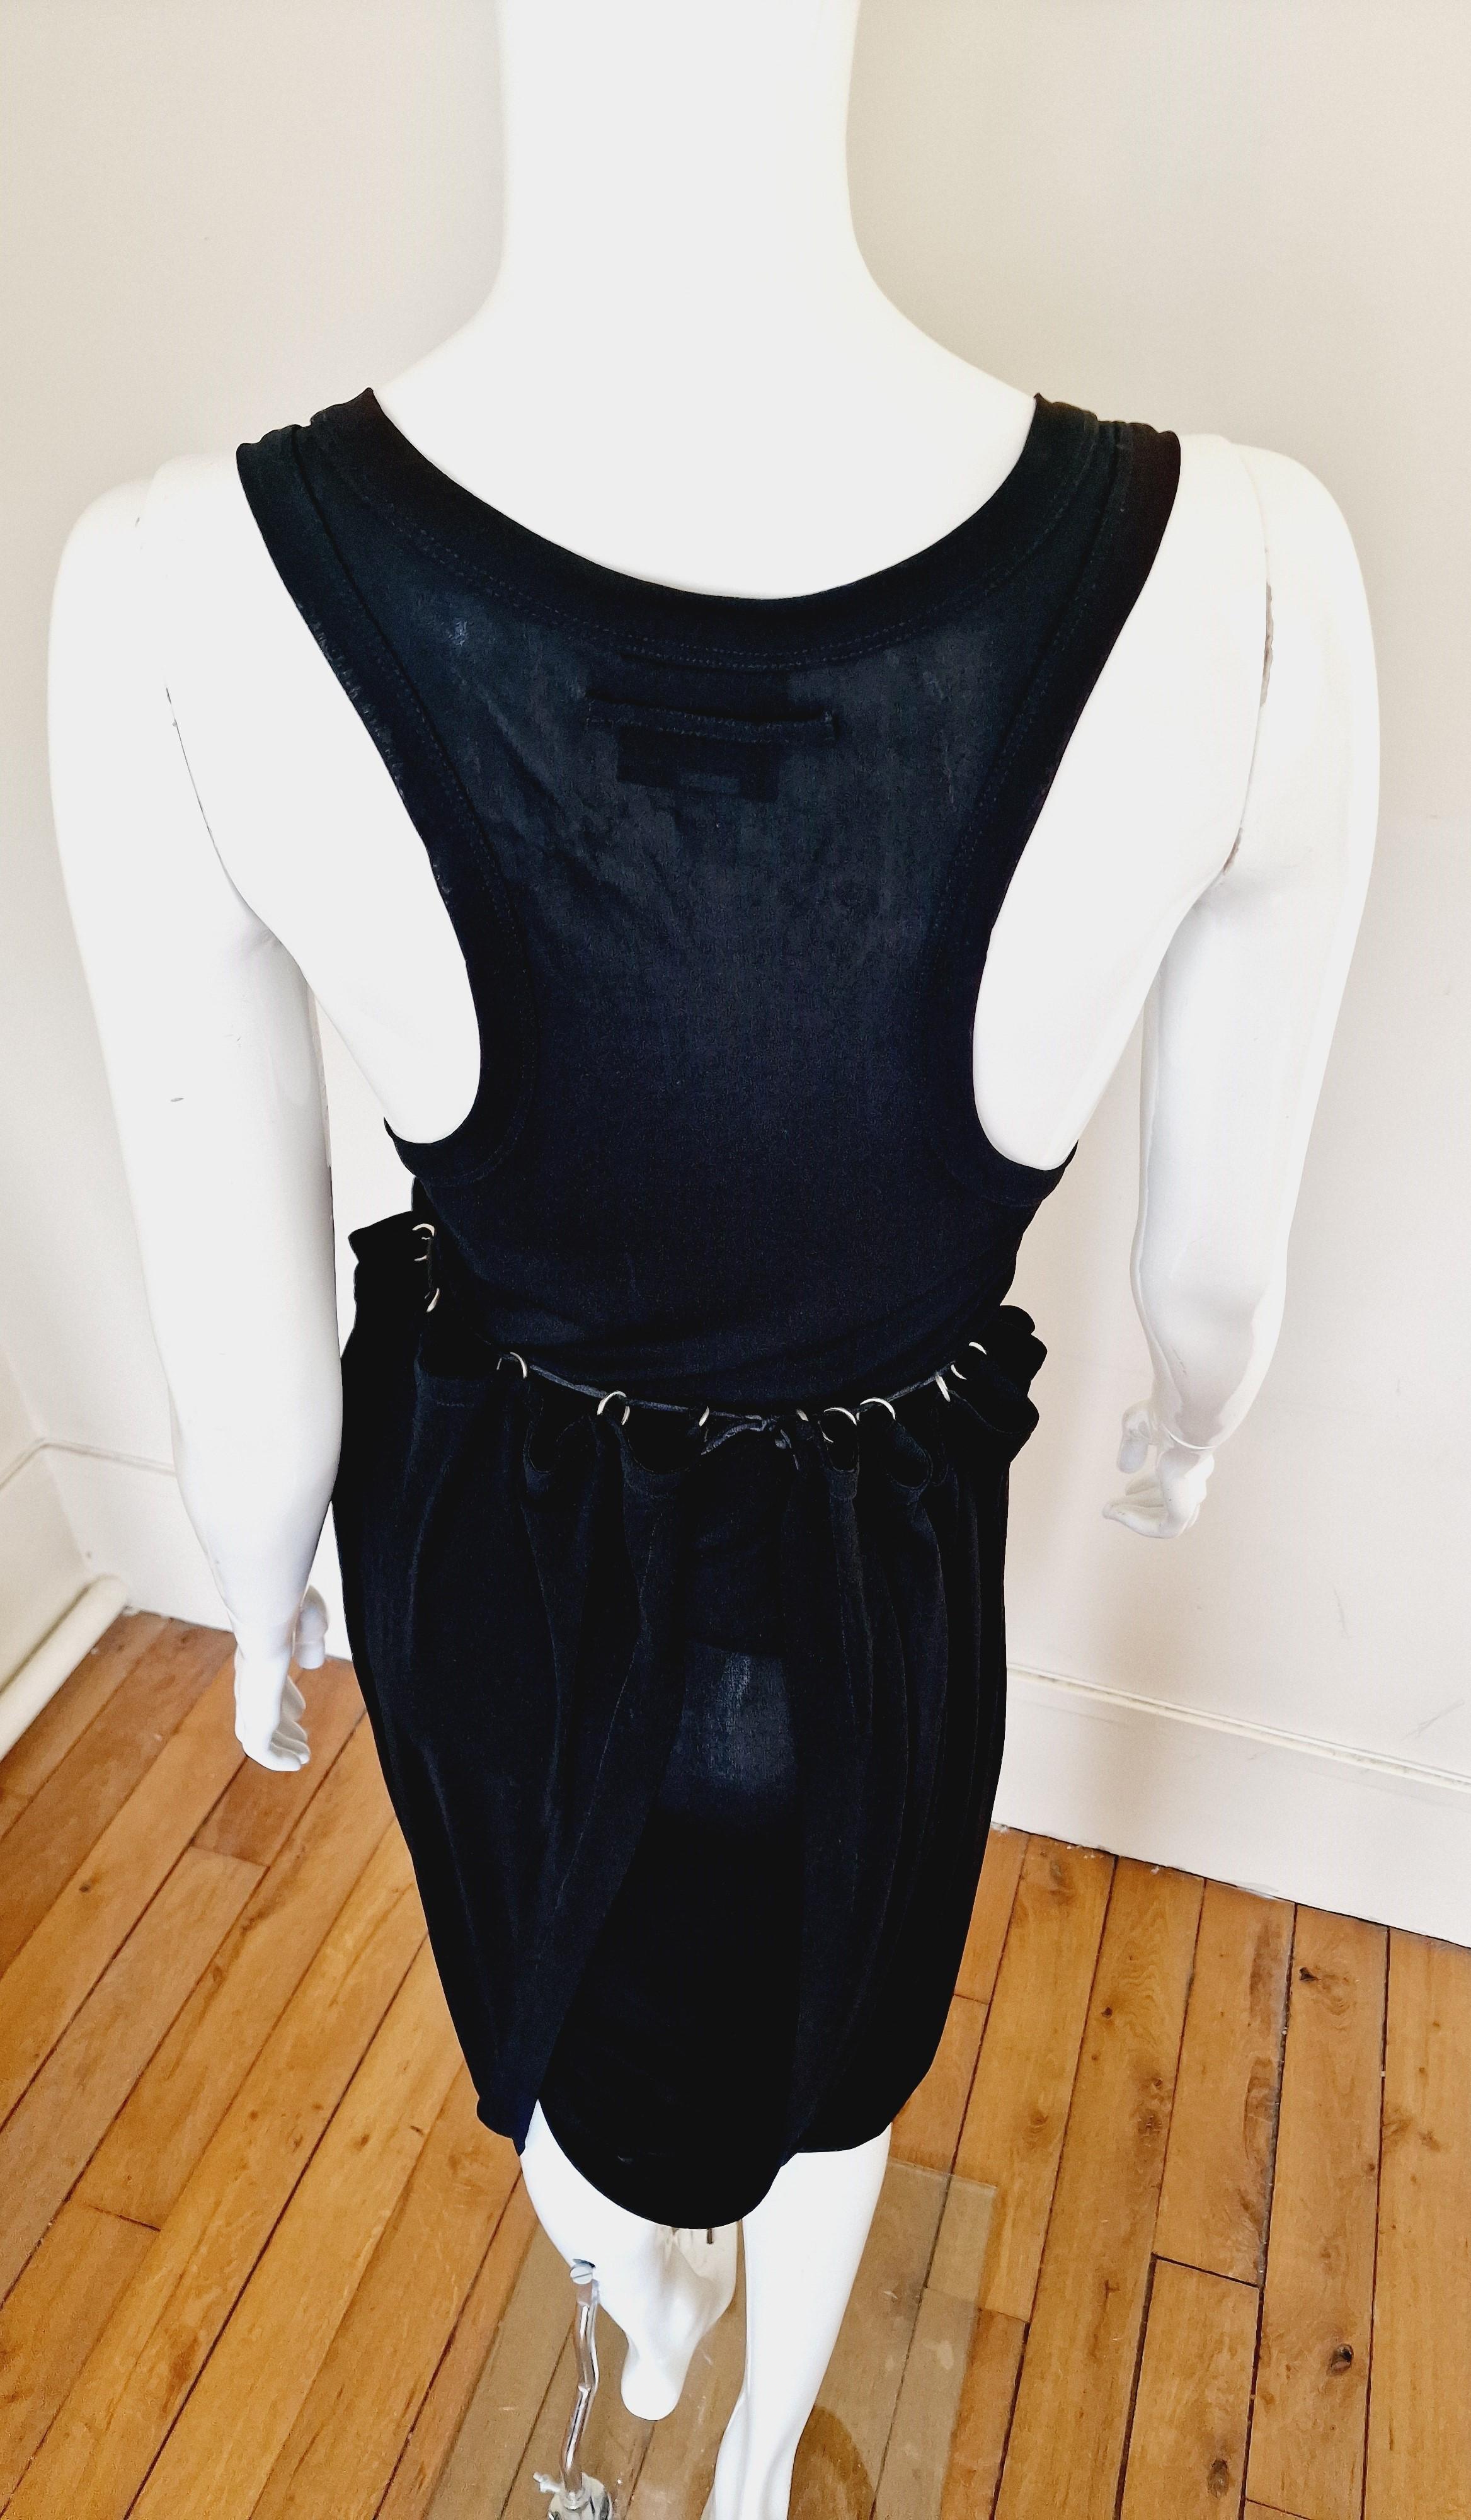 Jean Paul Gaultier Chain Metal Ring Black Vintage 90s Medium Evening Dress Gown For Sale 10